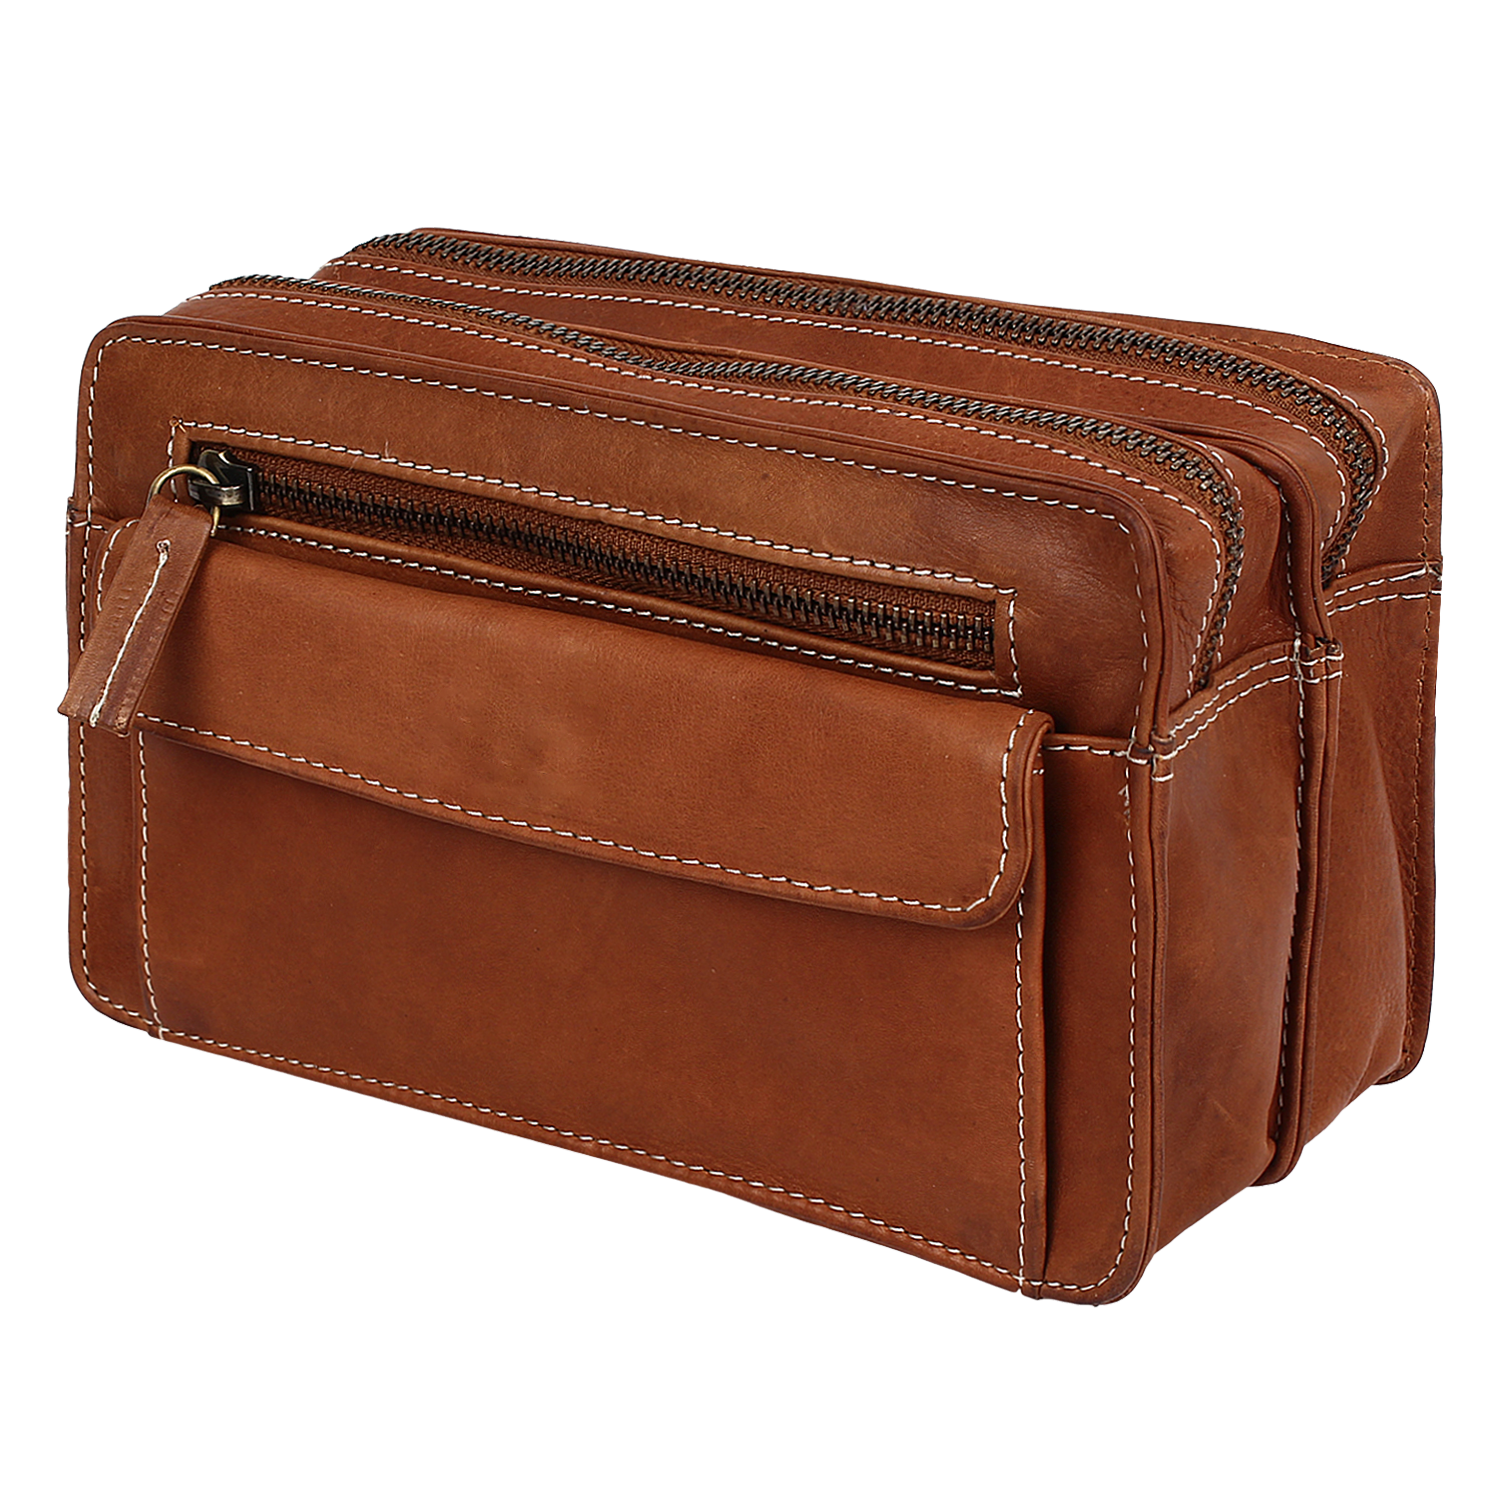 Personalized leather rolling tobacco pouch bag organizer – DMleather